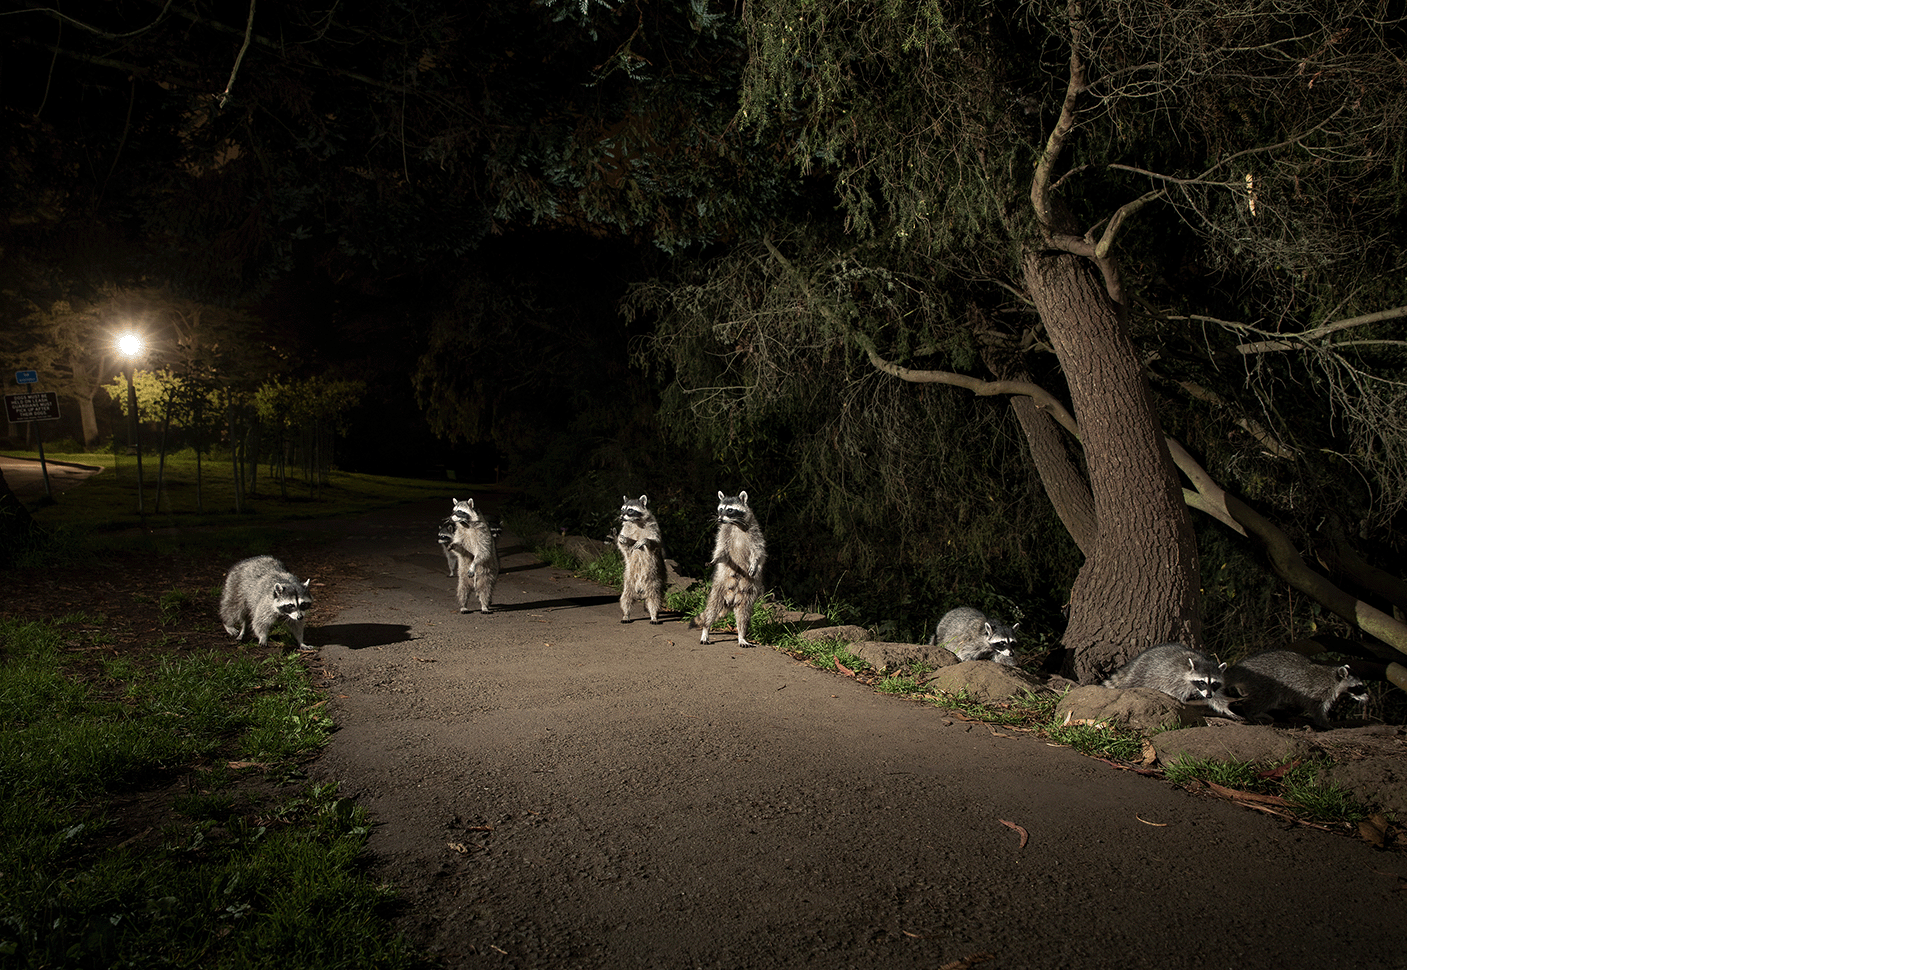 A group of raccoons in an urban park at night. Photo by Corey Arnold